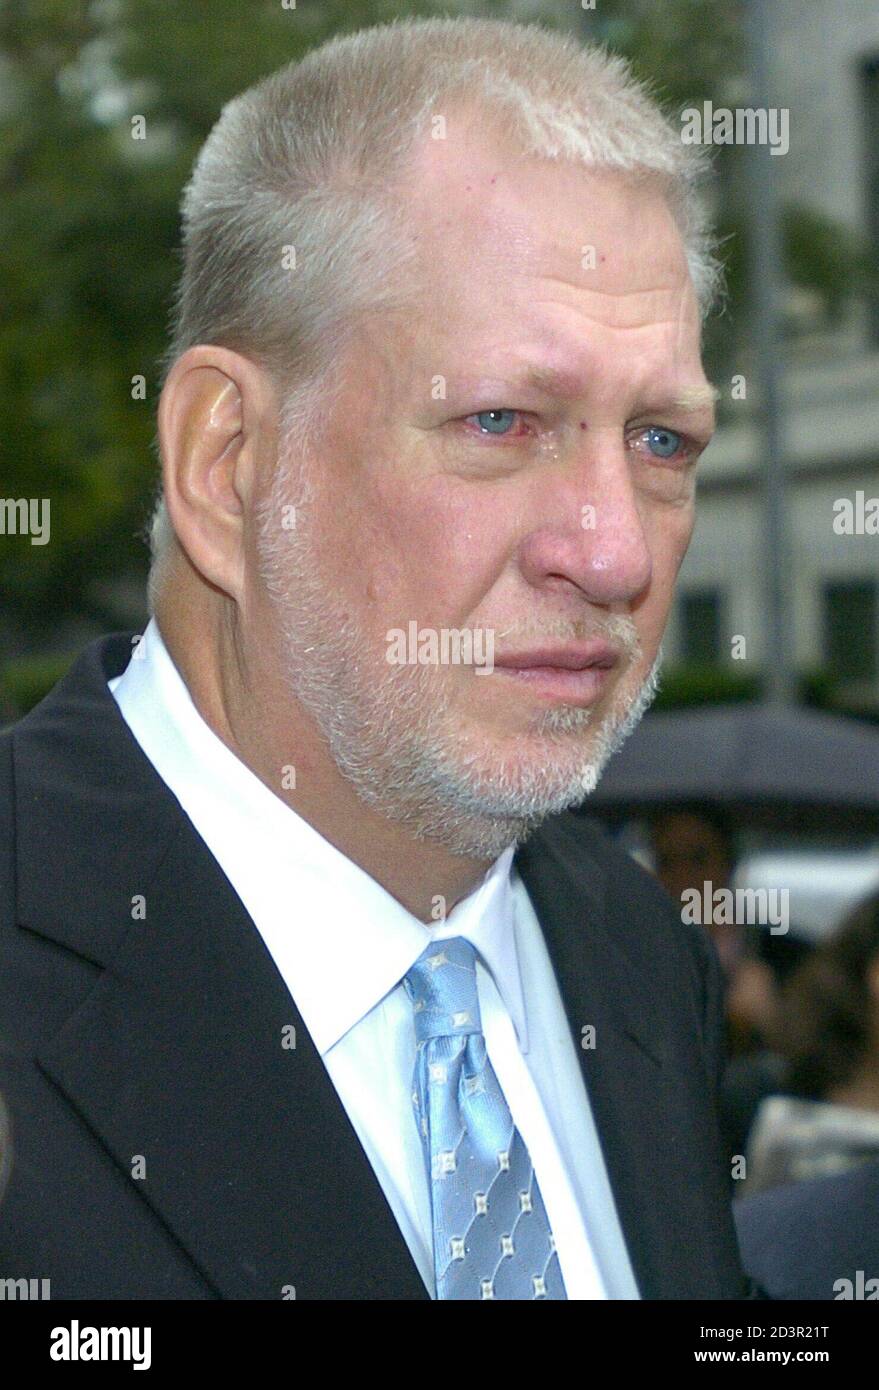 Former WorldCom Inc. CEO Bernard Ebbers departs from the U.S. Federal Court  after being sentenced to 25 years in prison, in New York July 13, 2005. [ Ebbers, the folksy entrepreneur who built